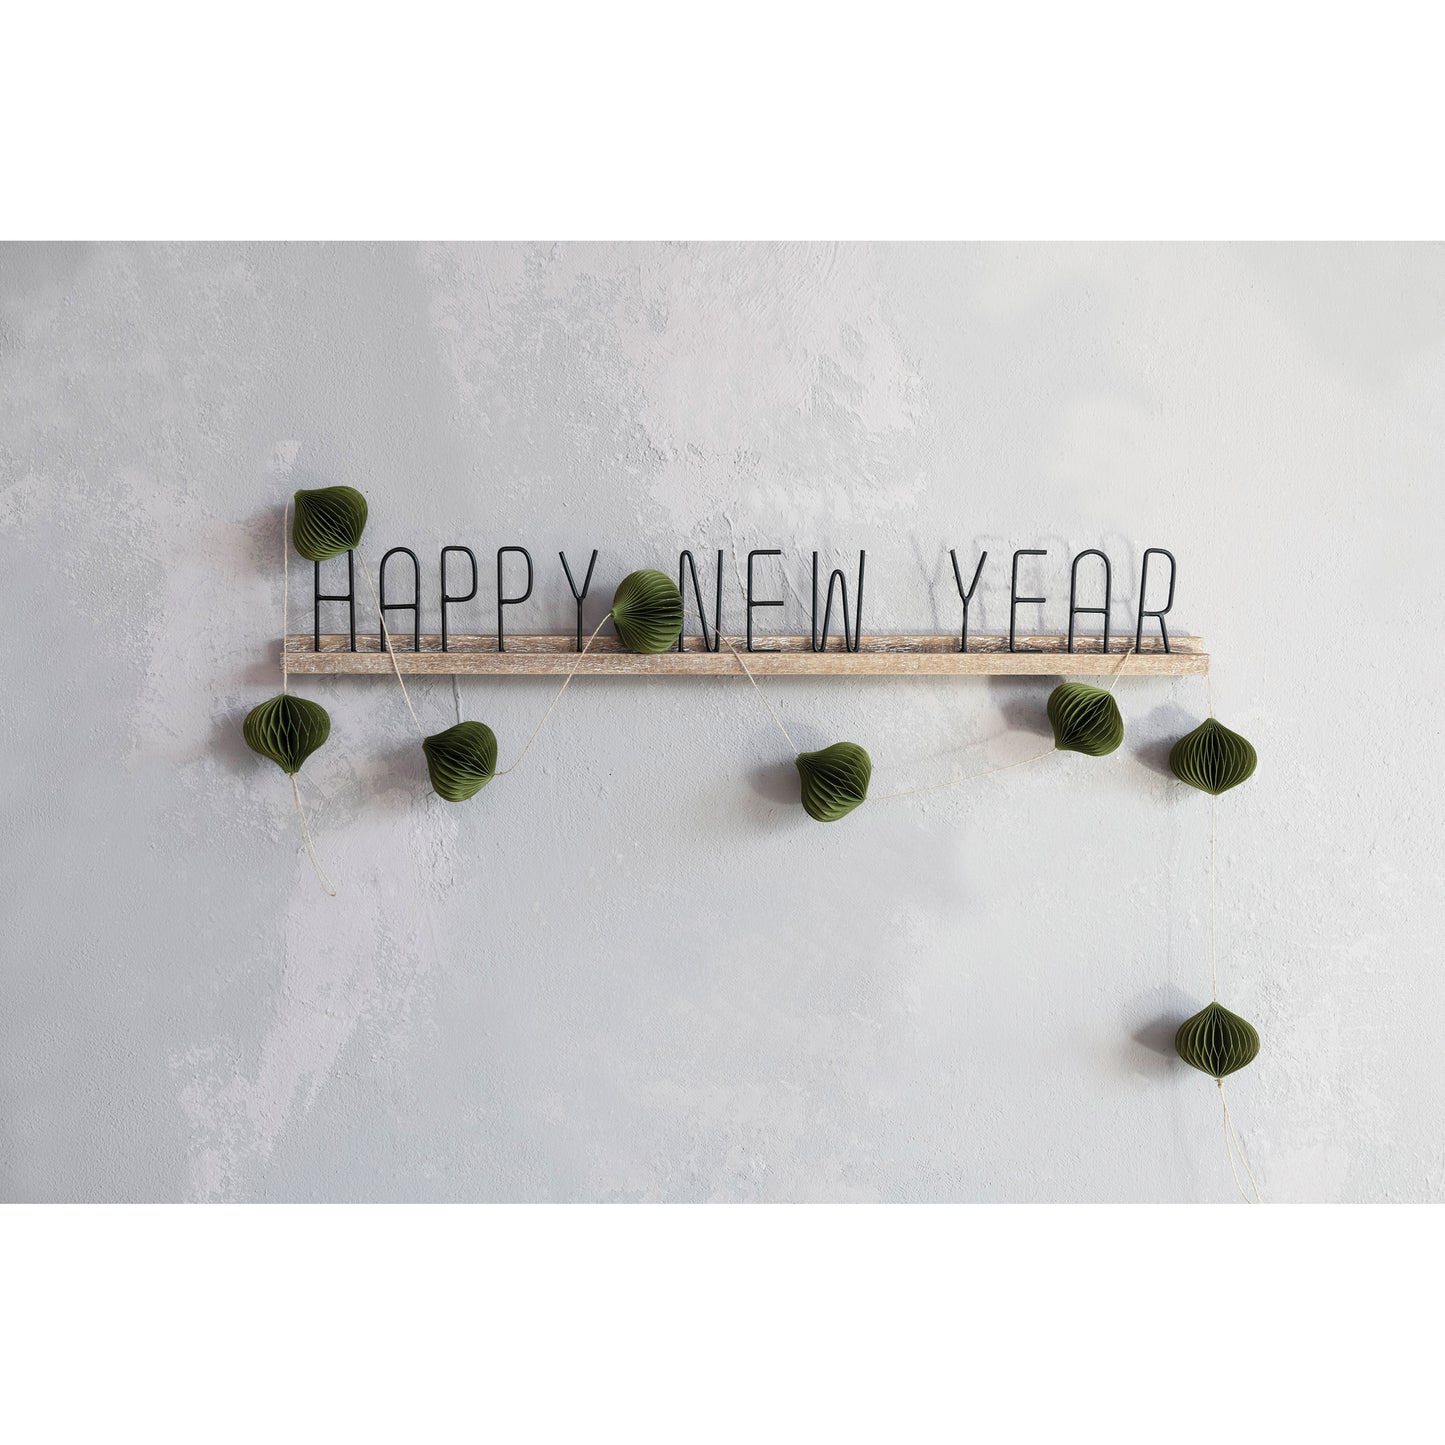 Metal and Wood Mantel Sign "Happy New Year"